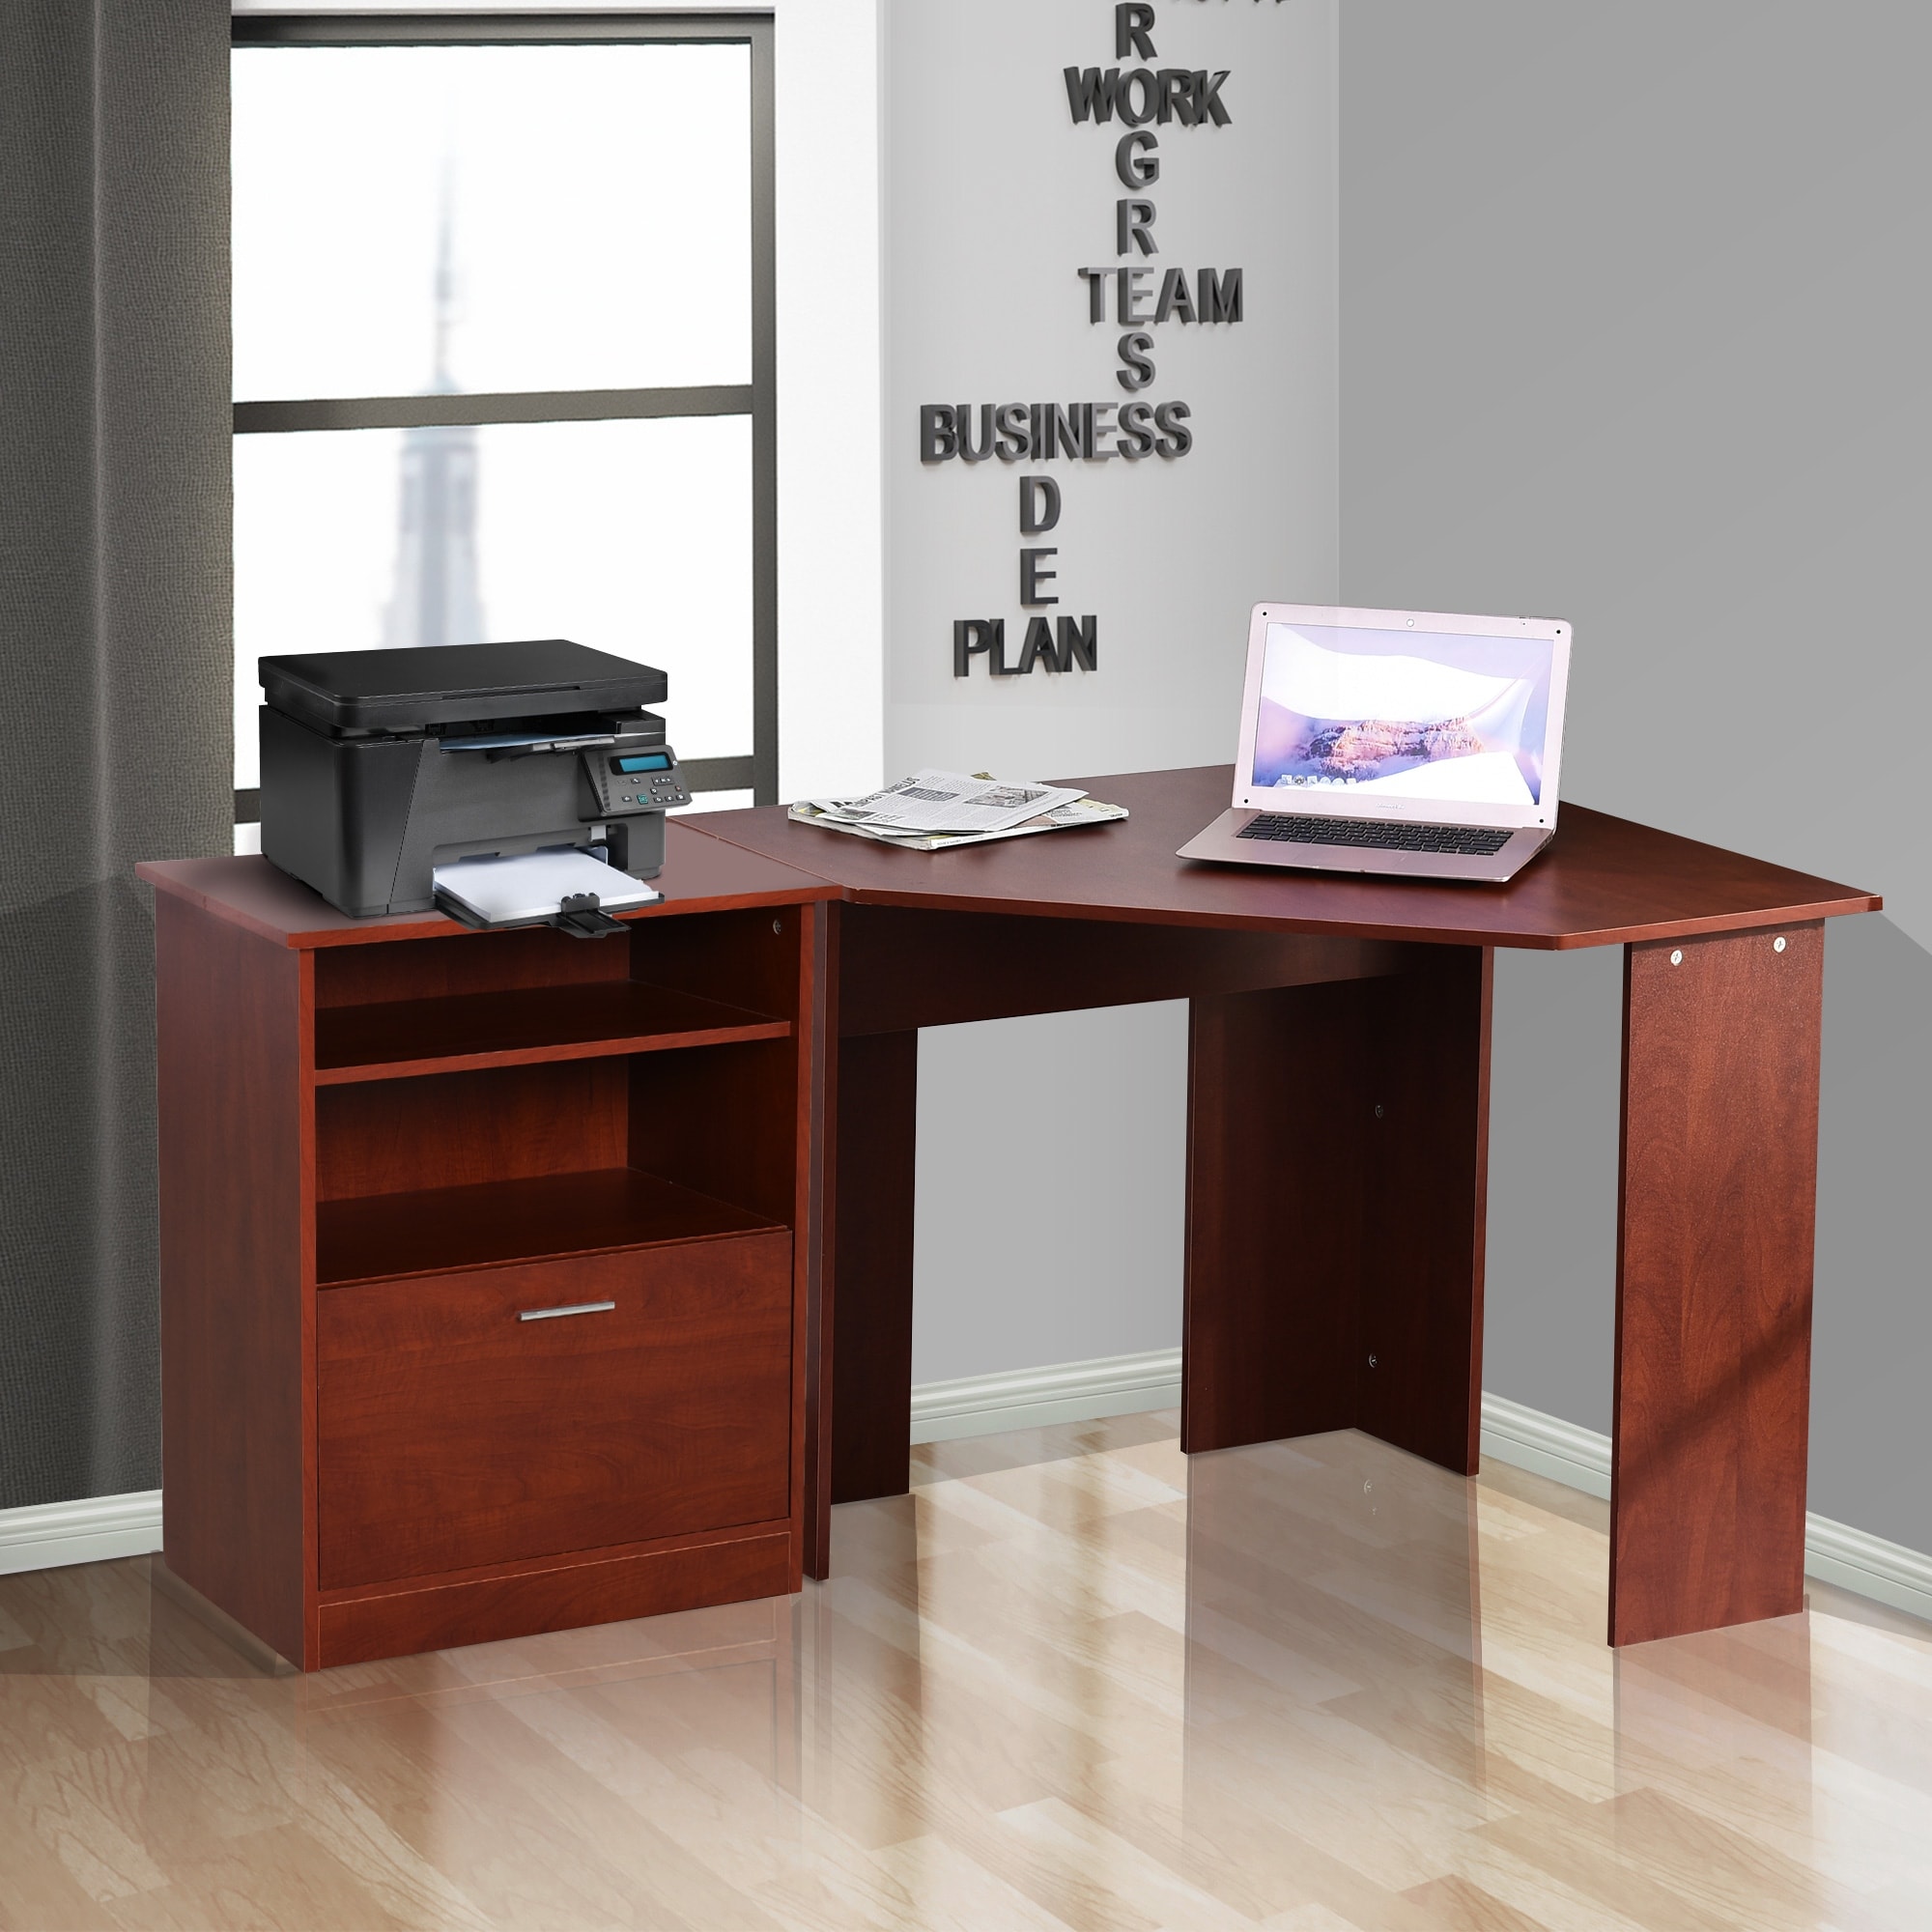 https://ak1.ostkcdn.com/images/products/is/images/direct/e278d9b0a41a863c83a883a48dcdf830c0d04ec4/HOMCOM-Computer-Desk-with-Printer-Cabinet%2C-L-Shaped-Corner-Desk-with-Storage%2C-Study-PC-Workstation-for-Home-Office.jpg